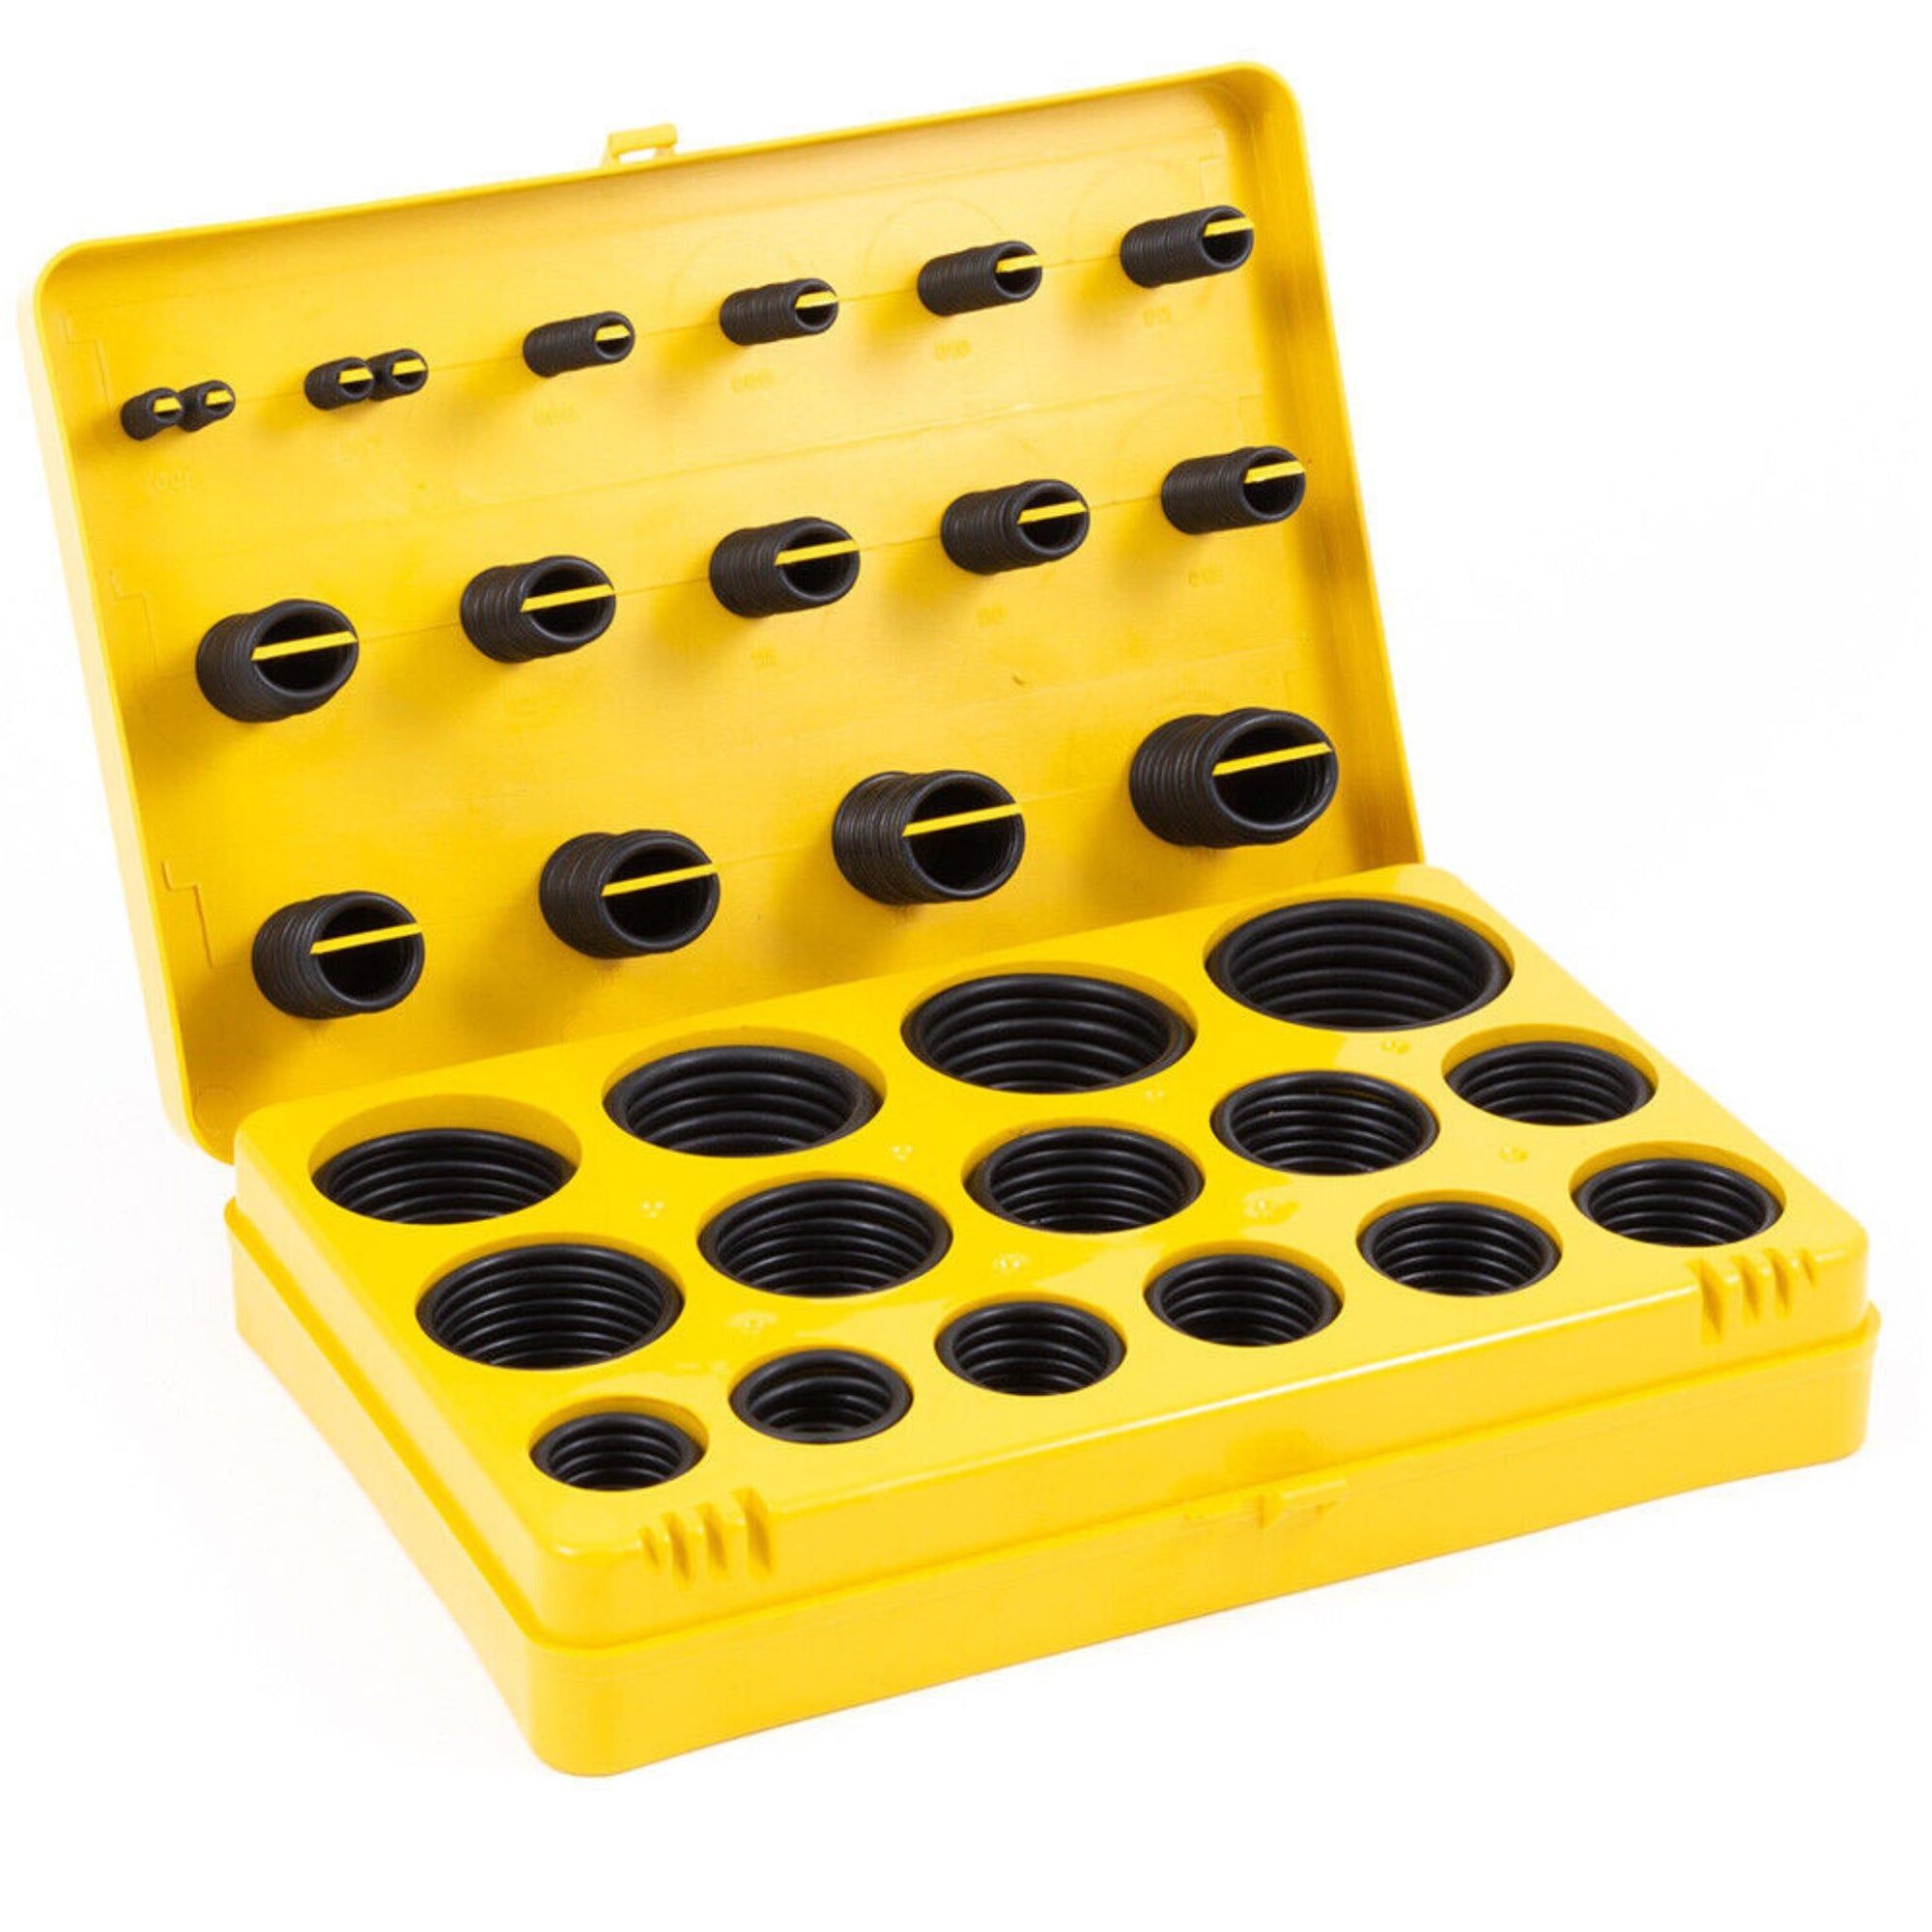 382 Piece Imperial O-Ring Assortment Kit - South East Clearance Centre